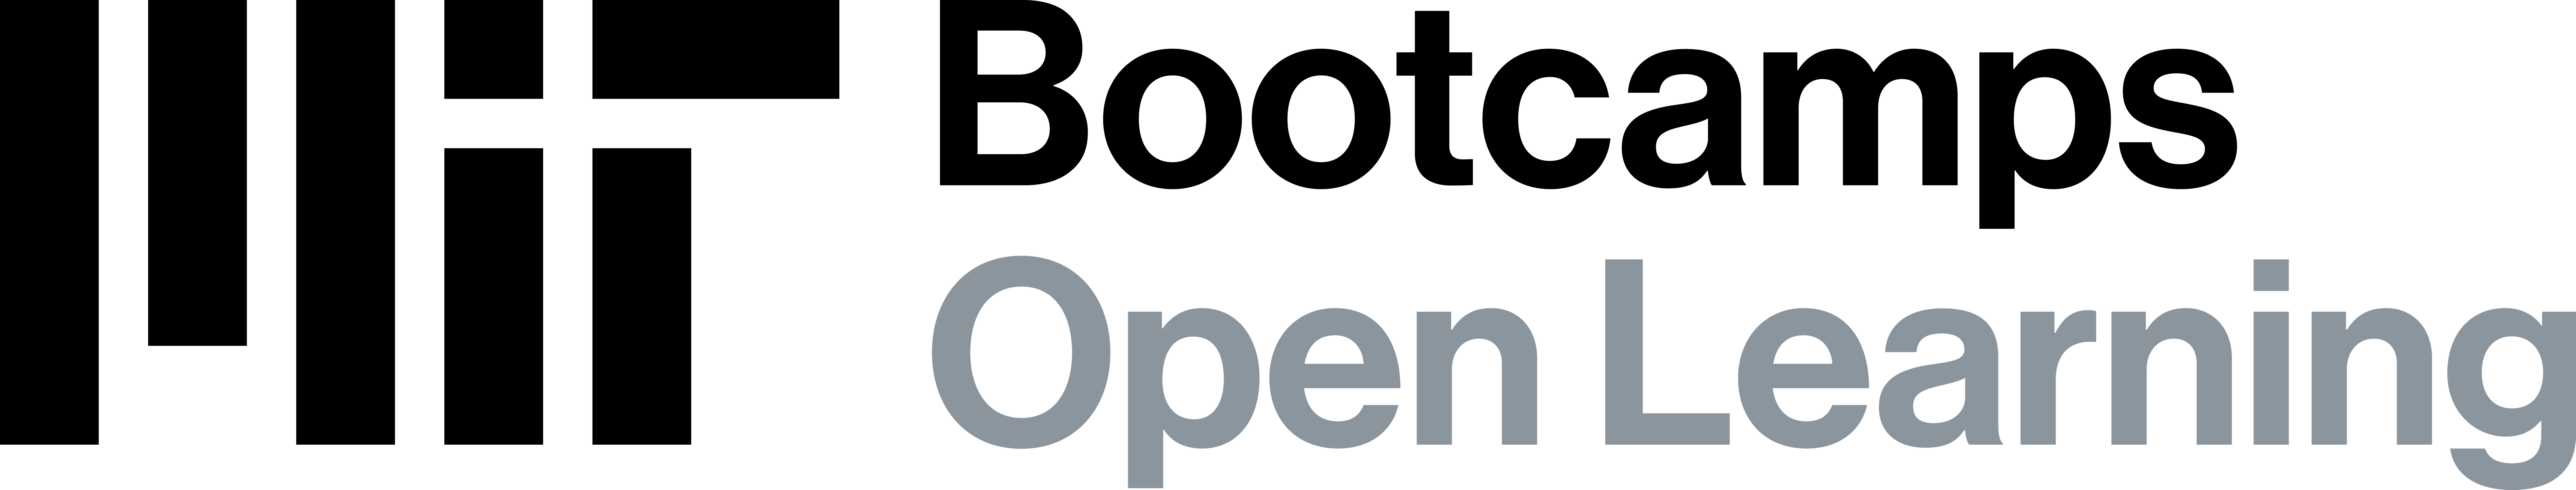 MIT Open Learning Bootcamps text-based logo